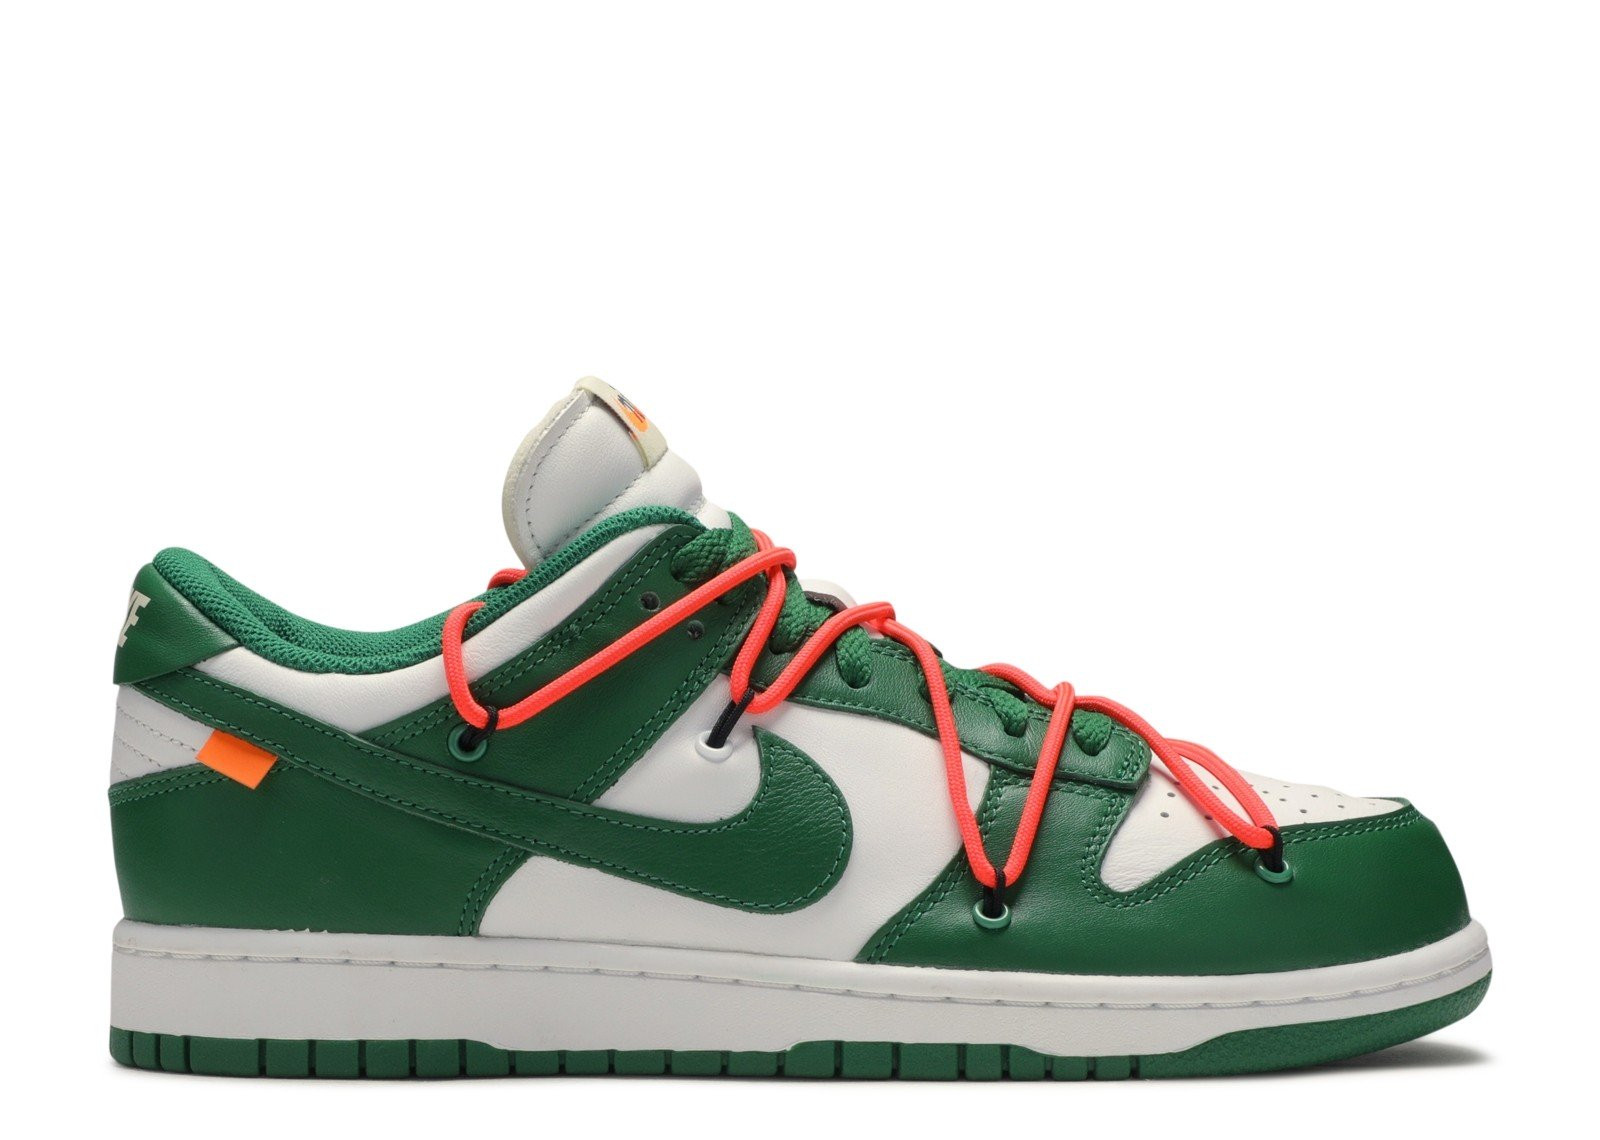 Dunk Low “Off White - Pine Green 